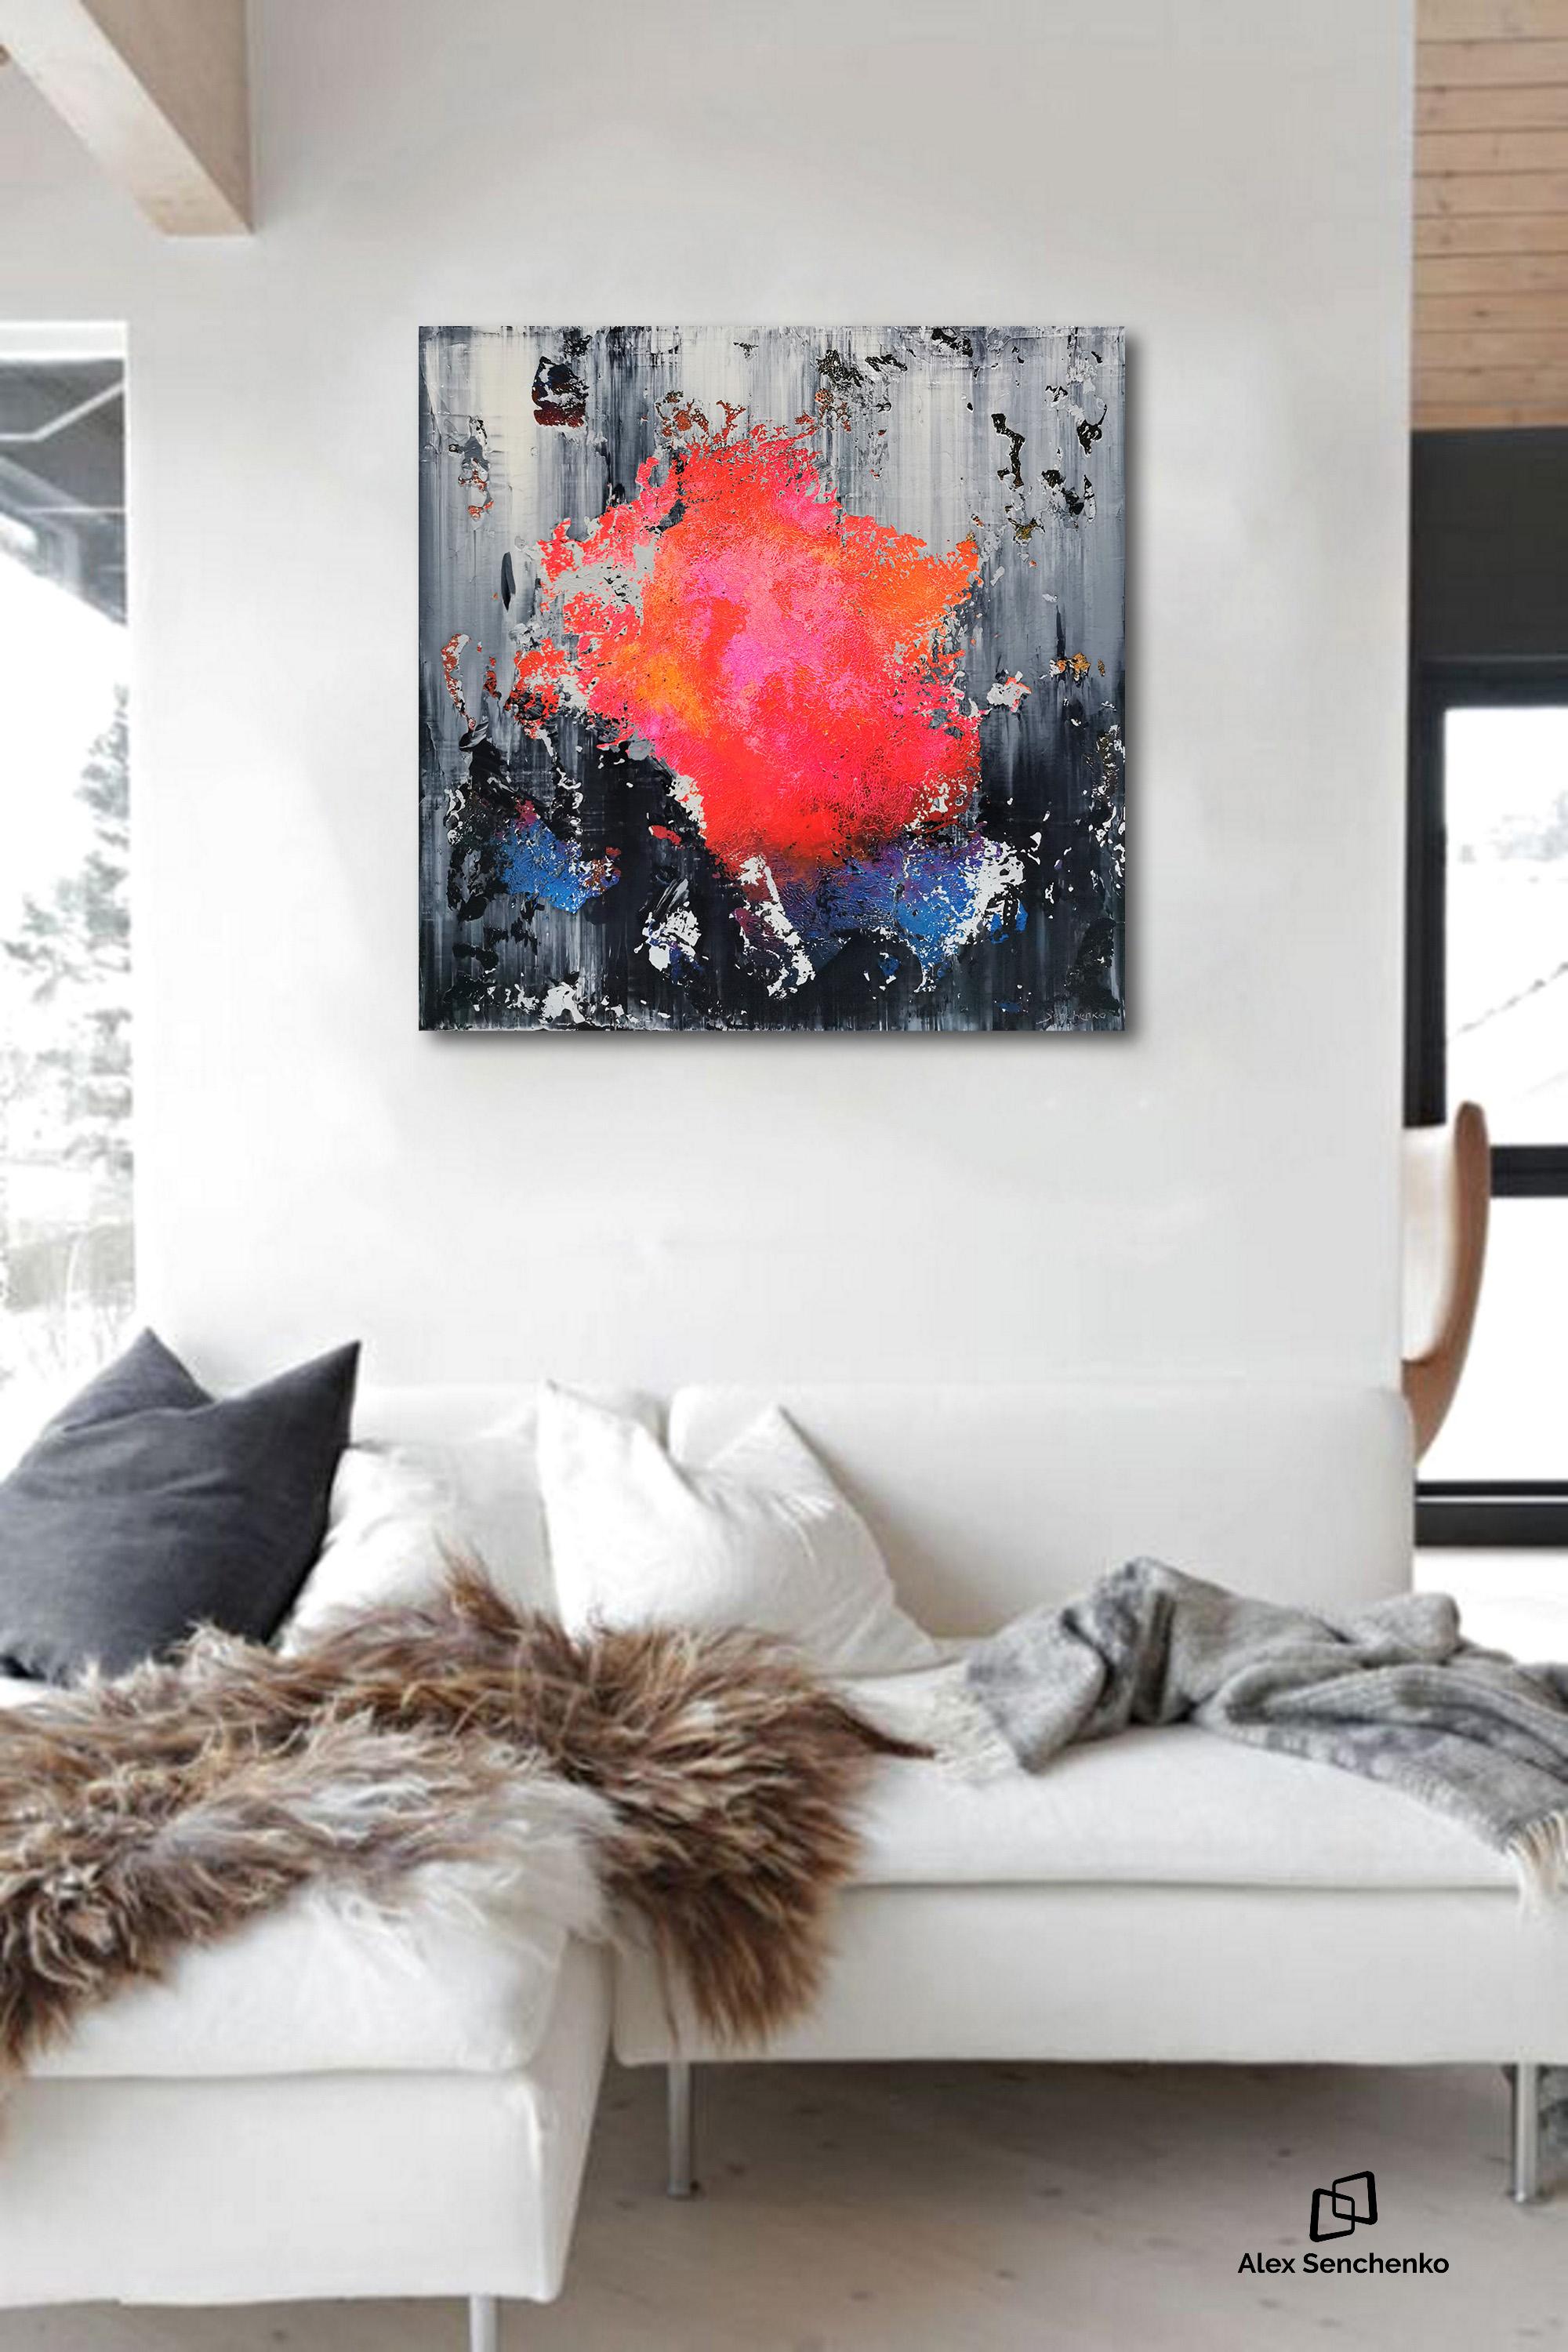 Fill your home with what inspires you.
This original artwork by Alex Senchenko is an abstract, contemporary acrylic on canvas piece. Perfect for a room that needs a burst of color.
Comes with a certificate of authenticity, signed and dated by the